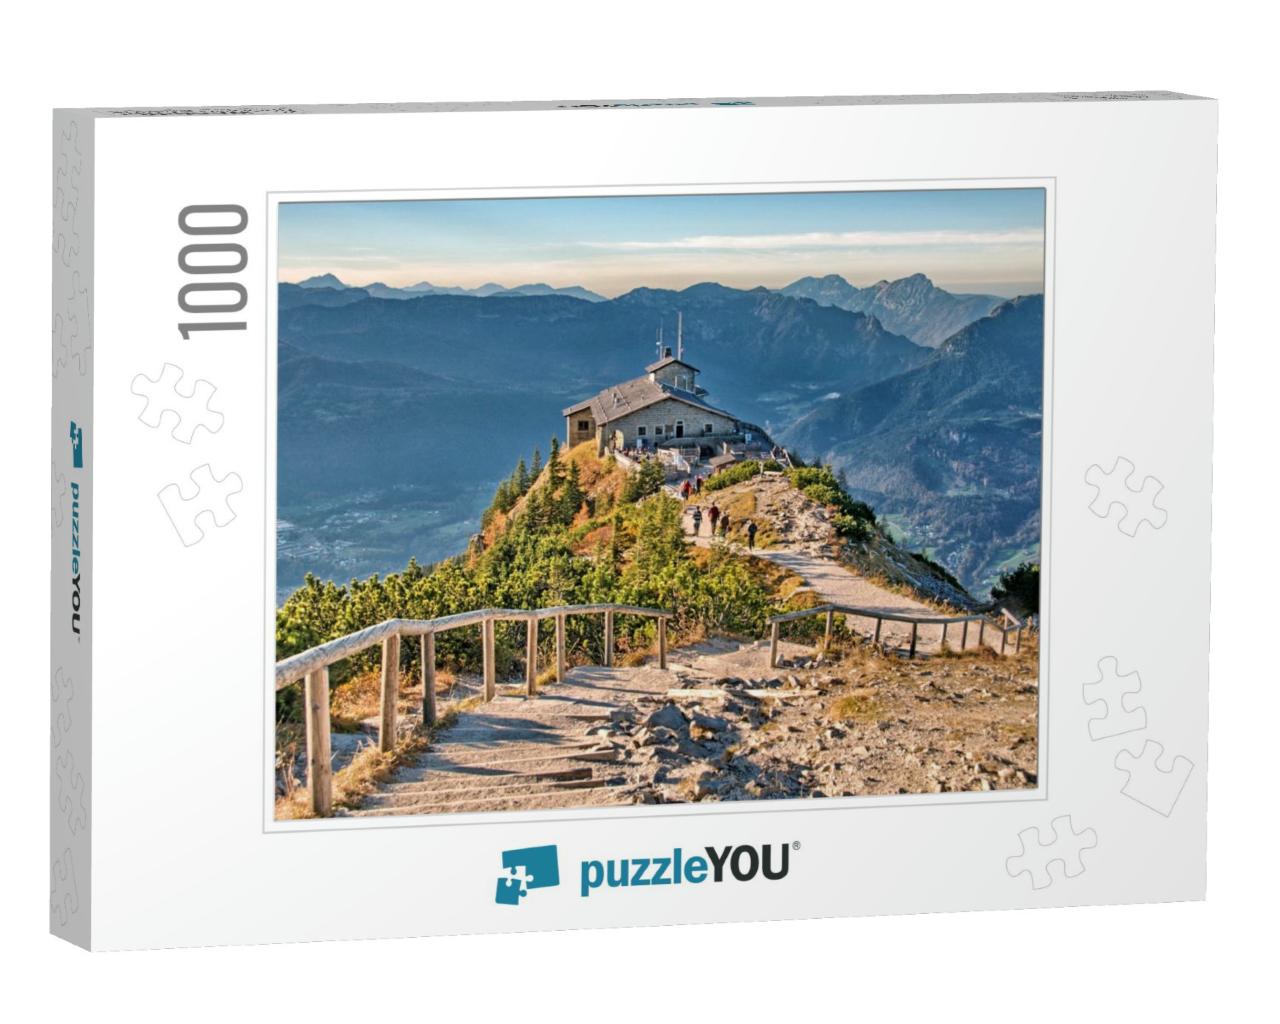 Kehlstein Eagles Nest Berchtesgaden Bavaria Germany Alps... Jigsaw Puzzle with 1000 pieces